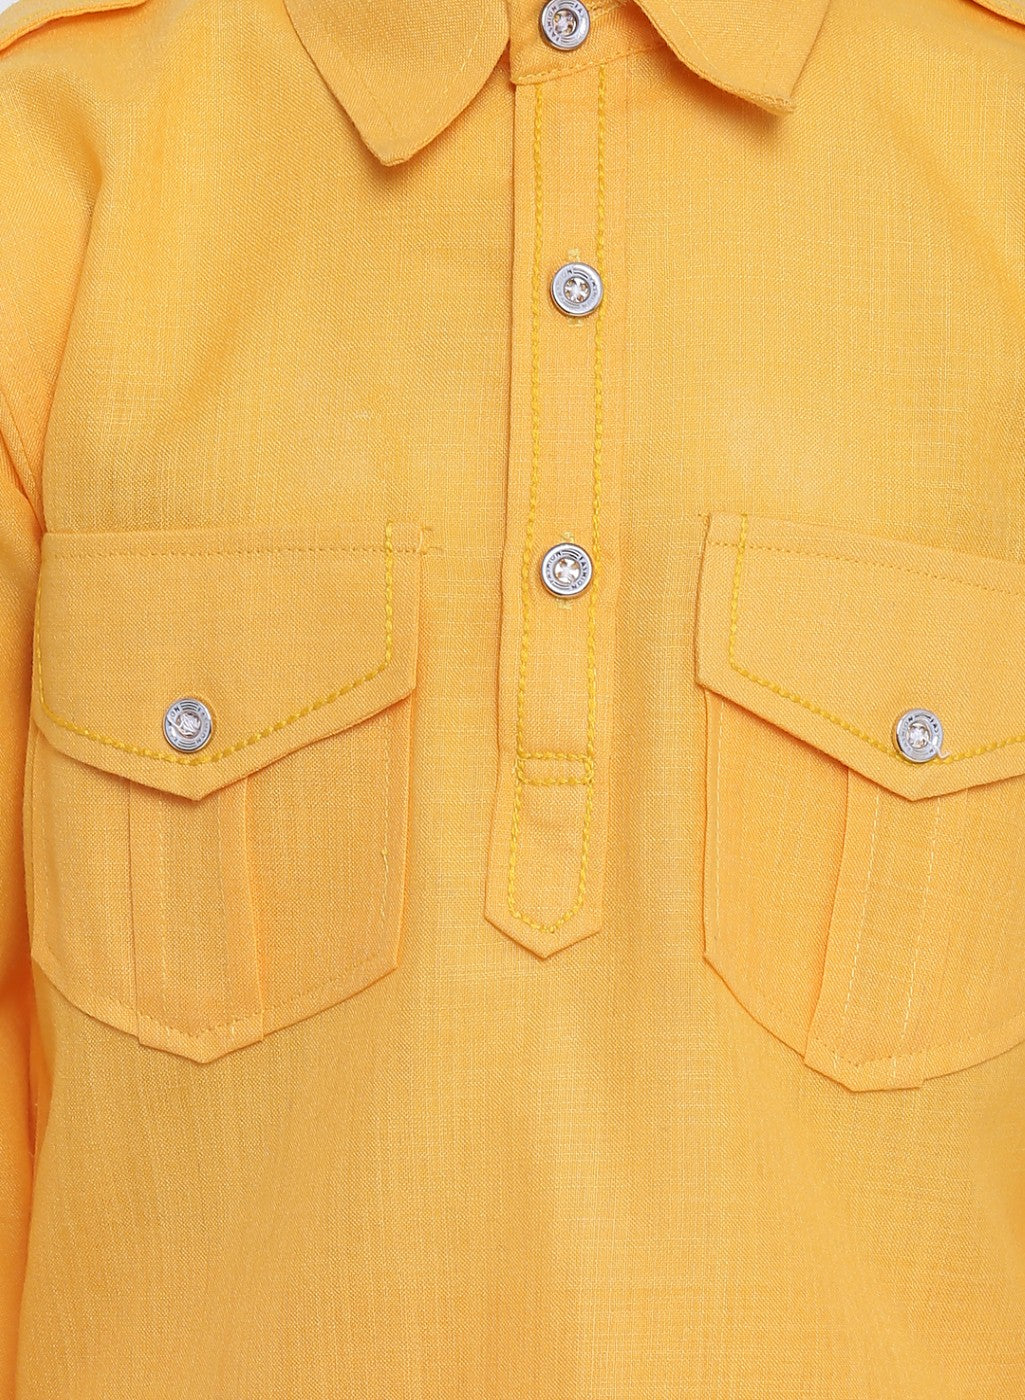 Boys Mustard Cotton Solid Pathani Suit